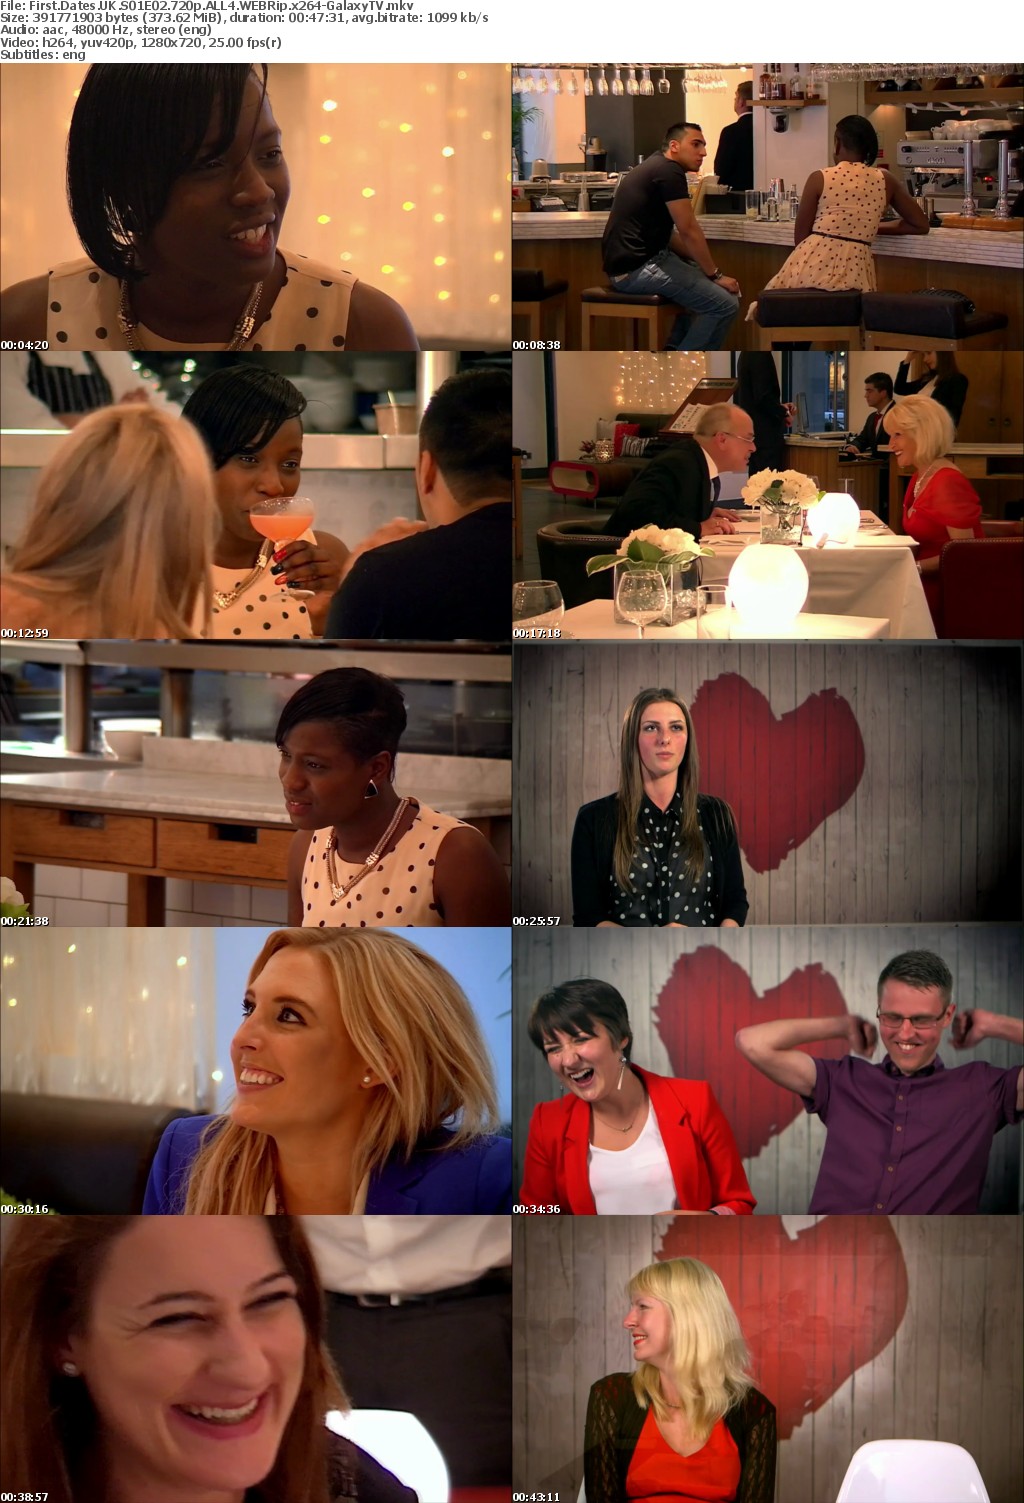 First Dates UK S01 COMPLETE 720p ALL4 WEBRip x264-GalaxyTV